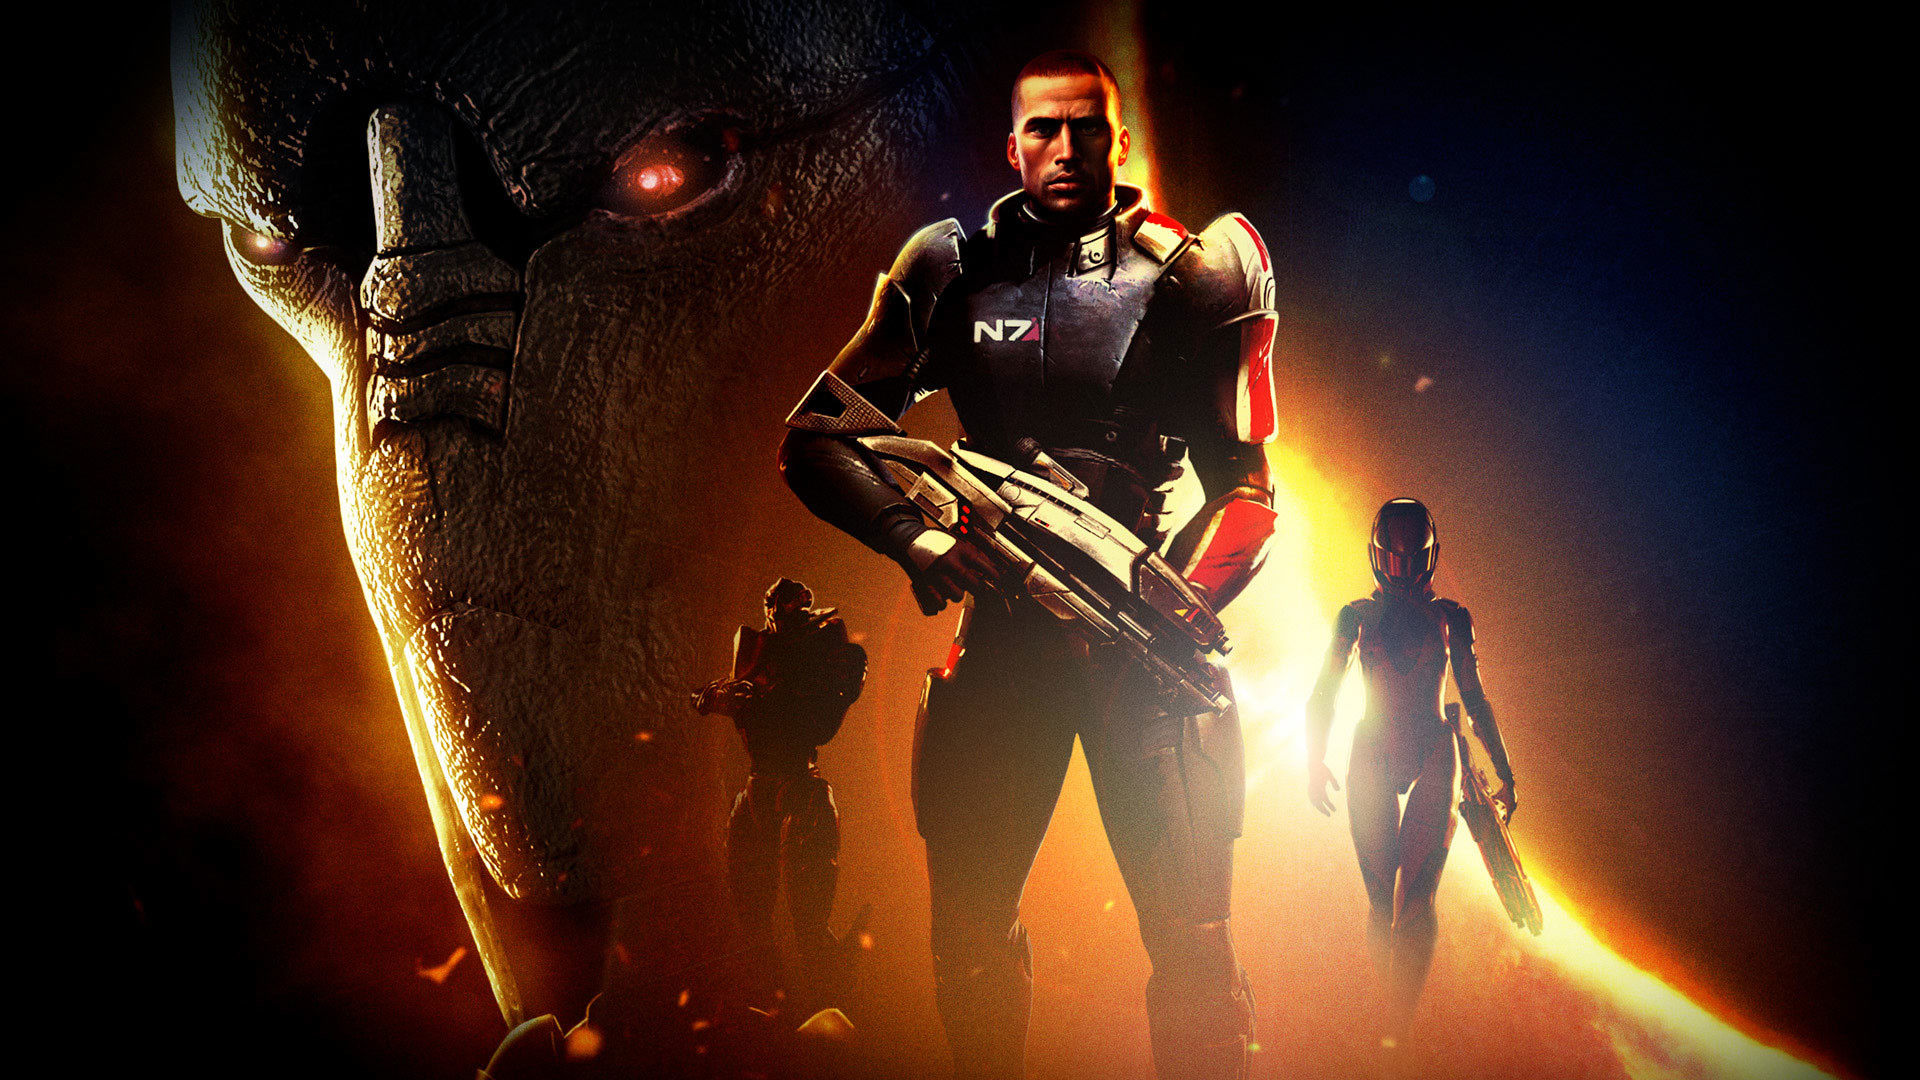 1920x1080 ... Mass Effect 2 is free on PC right now (update) - Polygon ...